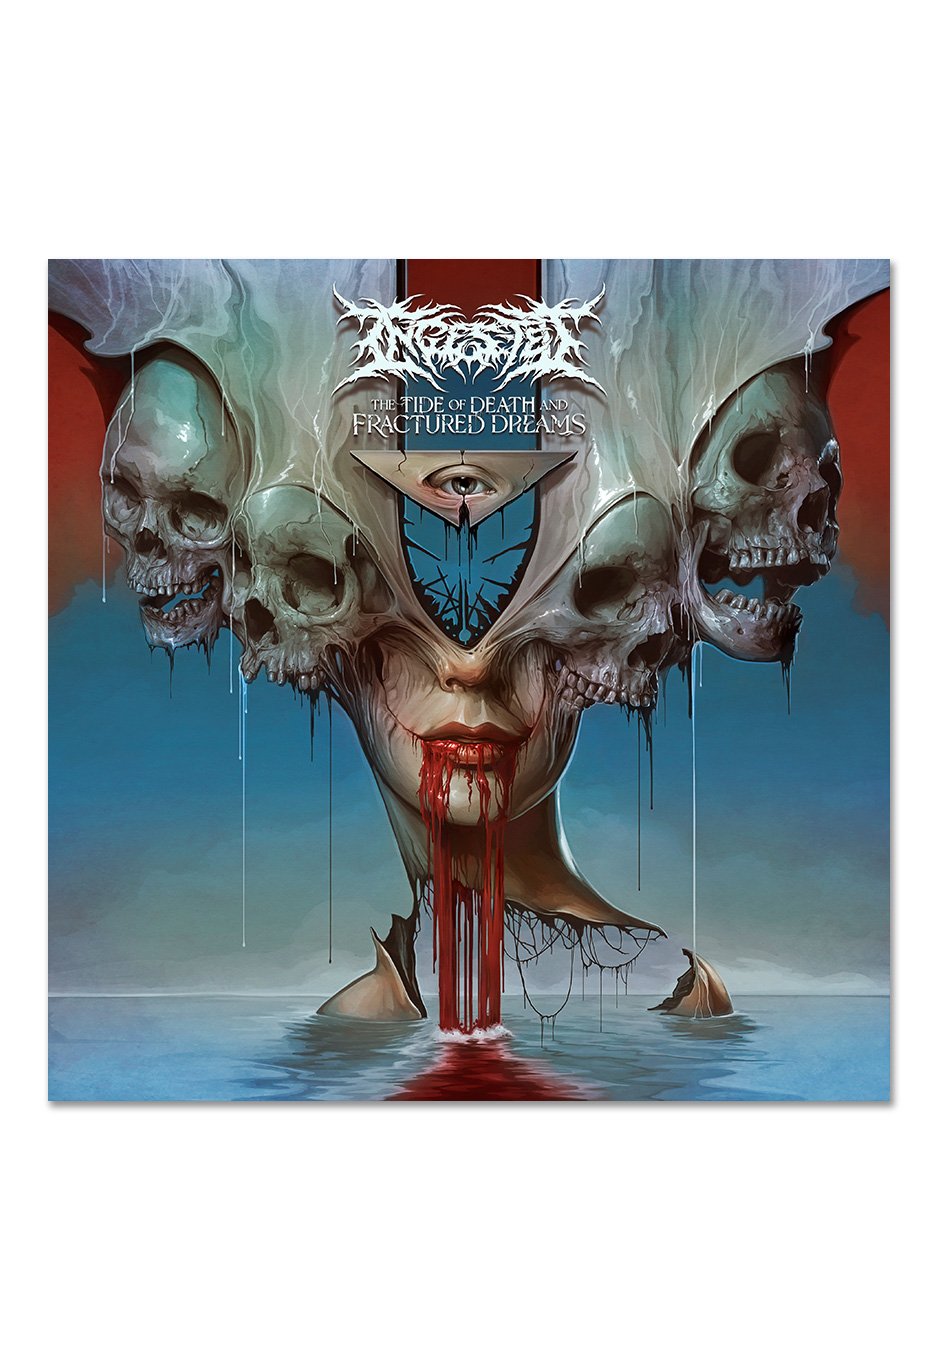 Ingested - The Tide Of Death And Fractured Dreams Clear w/ Red/White - Splattered Vinyl